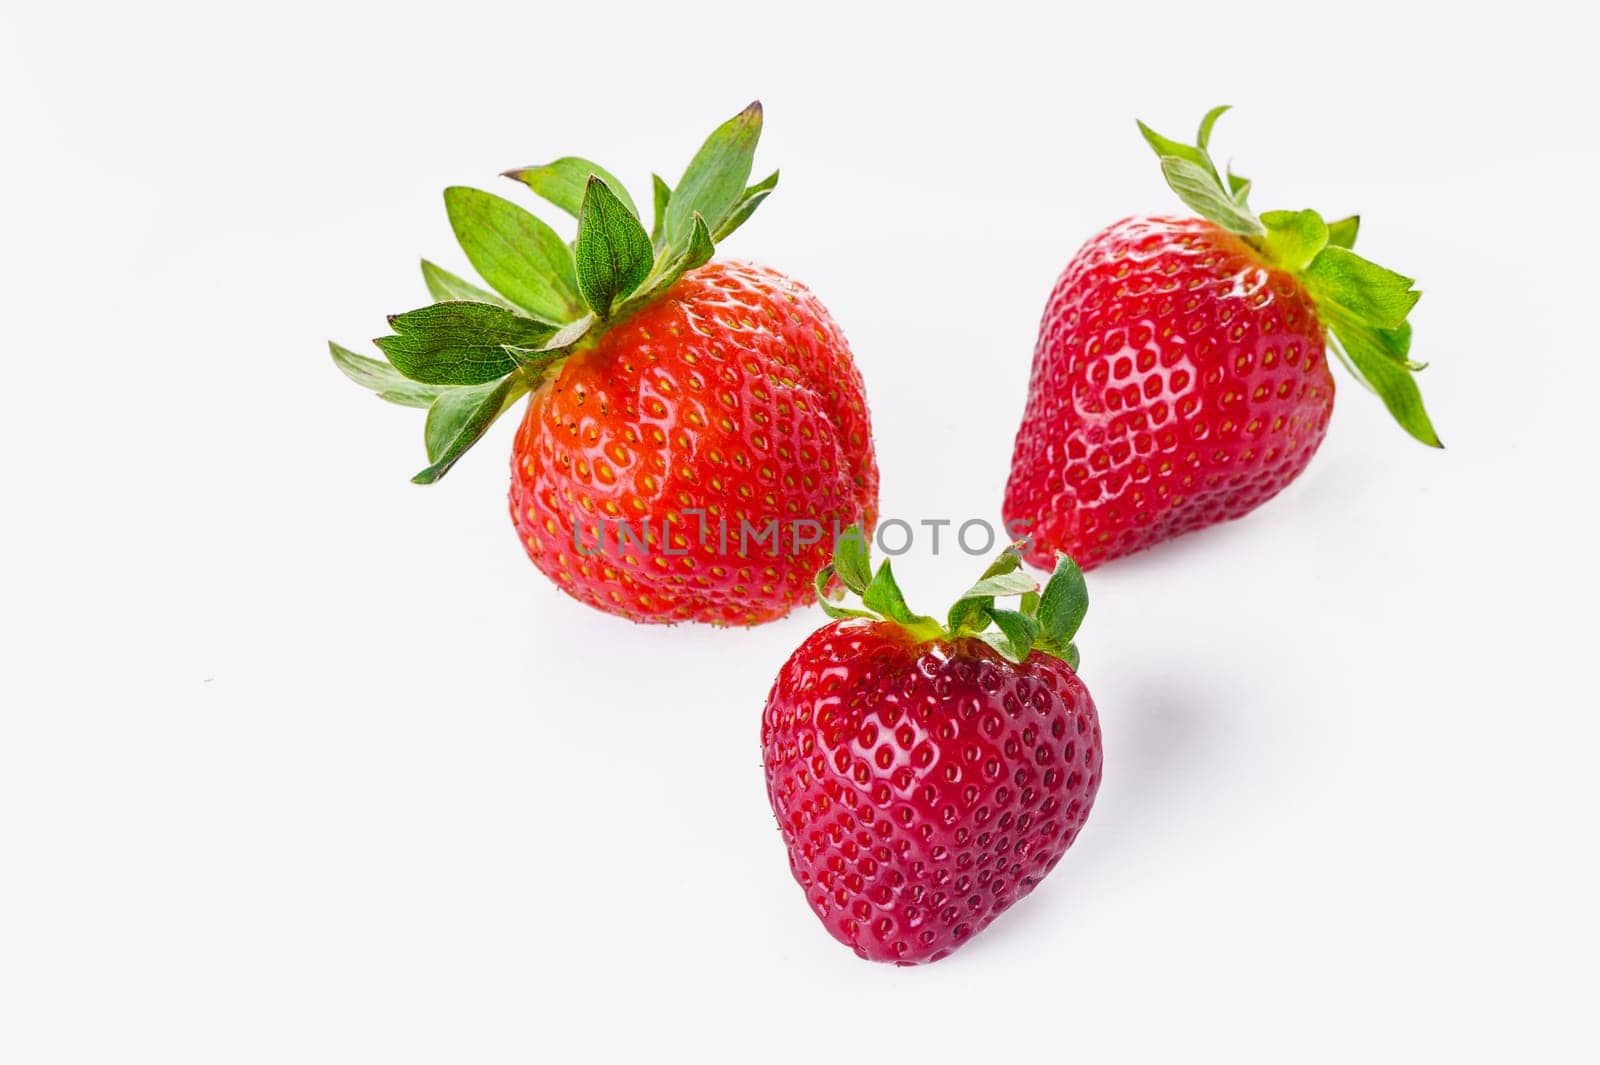 Pile of delicious fresh red strawberries on white background 2